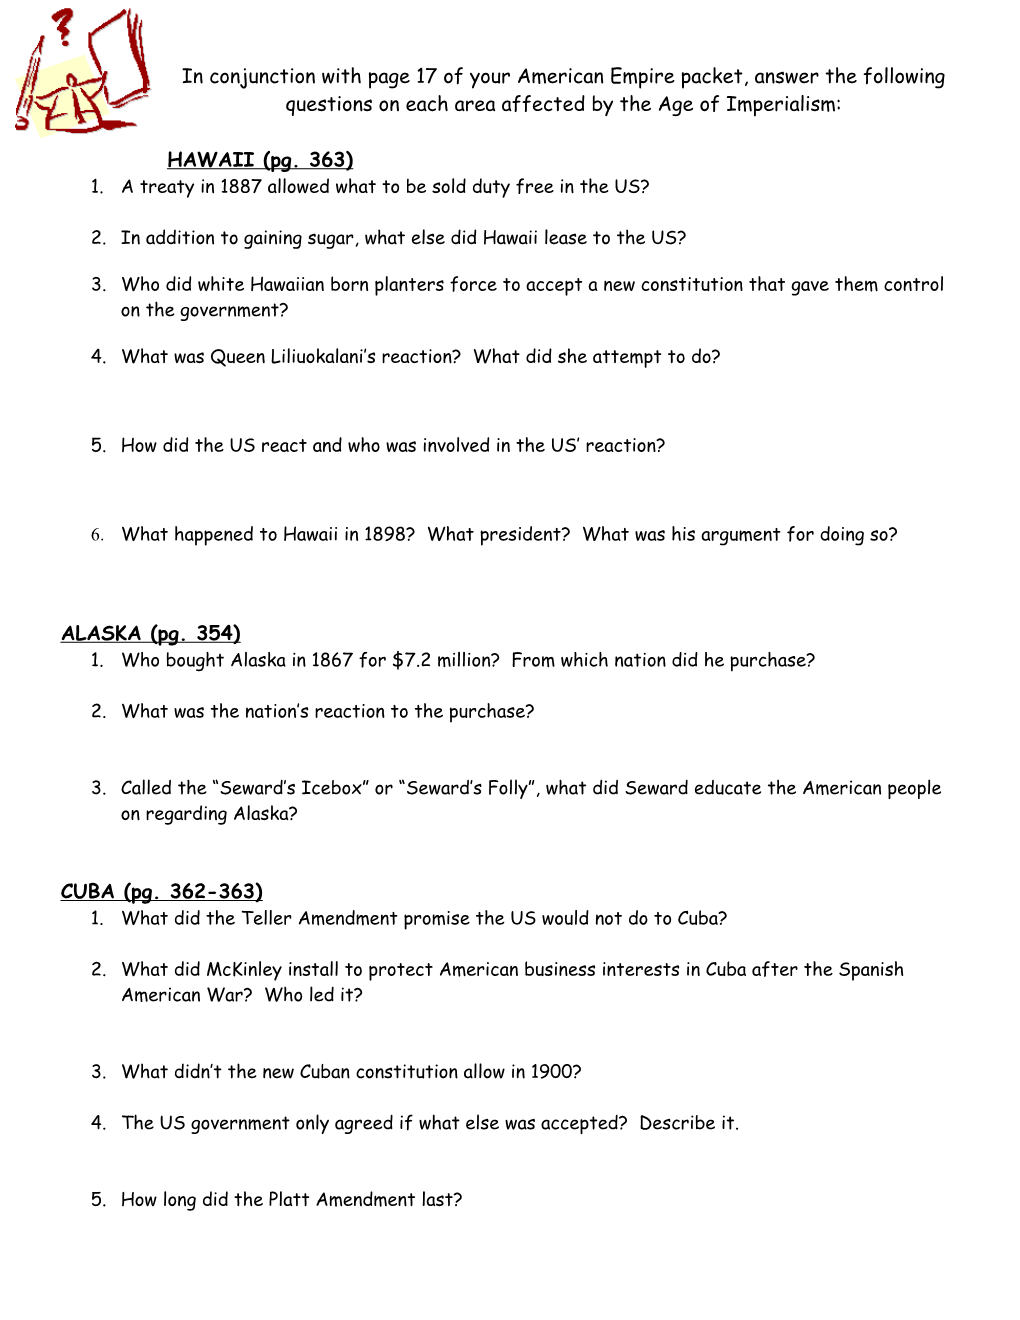 In Conjunction of Page 17 of Your Packet, Answer the Following Questions on Each Area